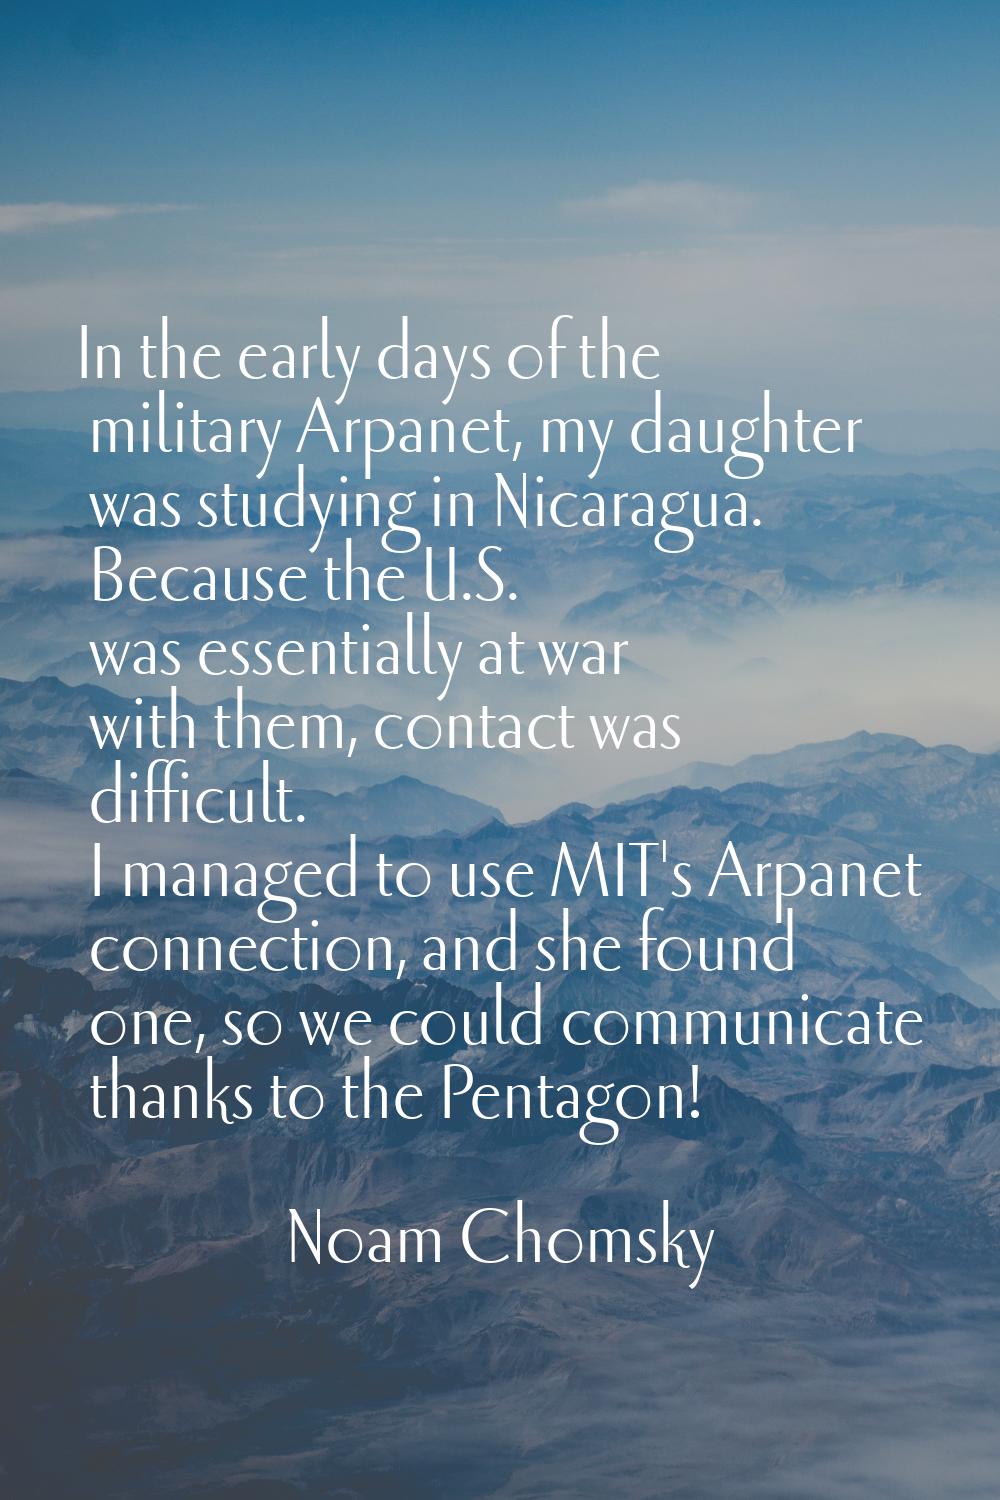 In the early days of the military Arpanet, my daughter was studying in Nicaragua. Because the U.S. 